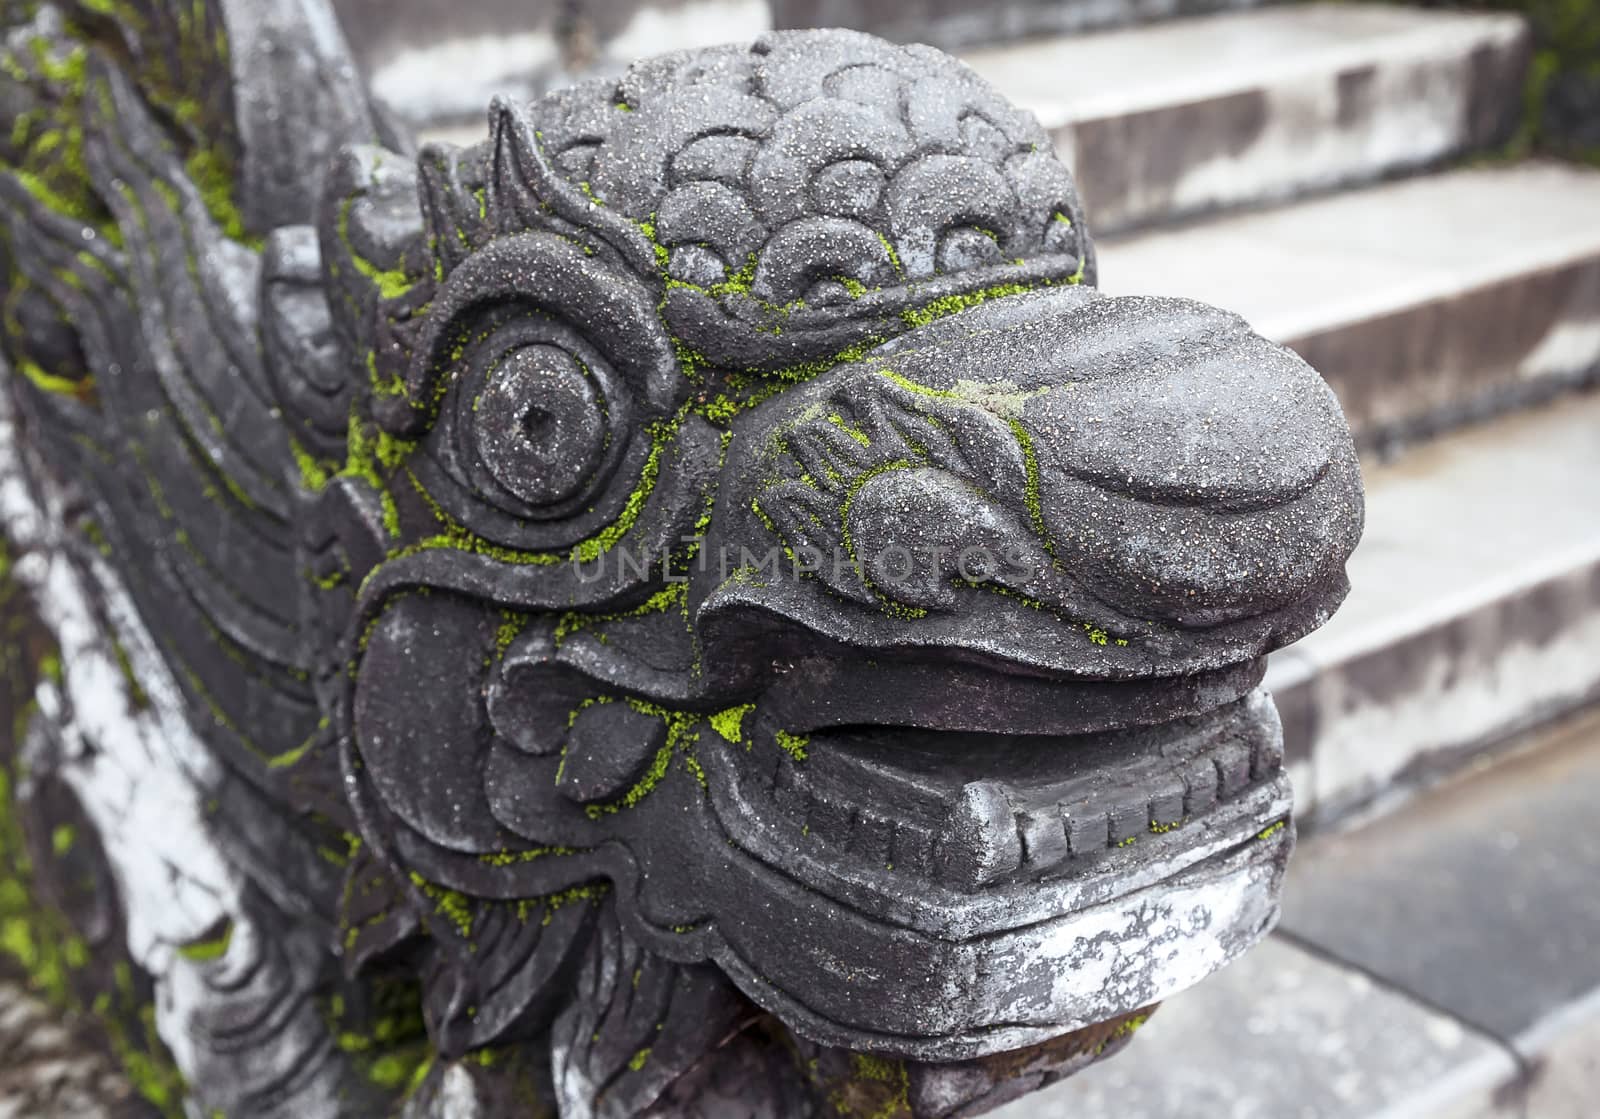 Dragon-shaped handrail in Hue Imperial Palace by Goodday